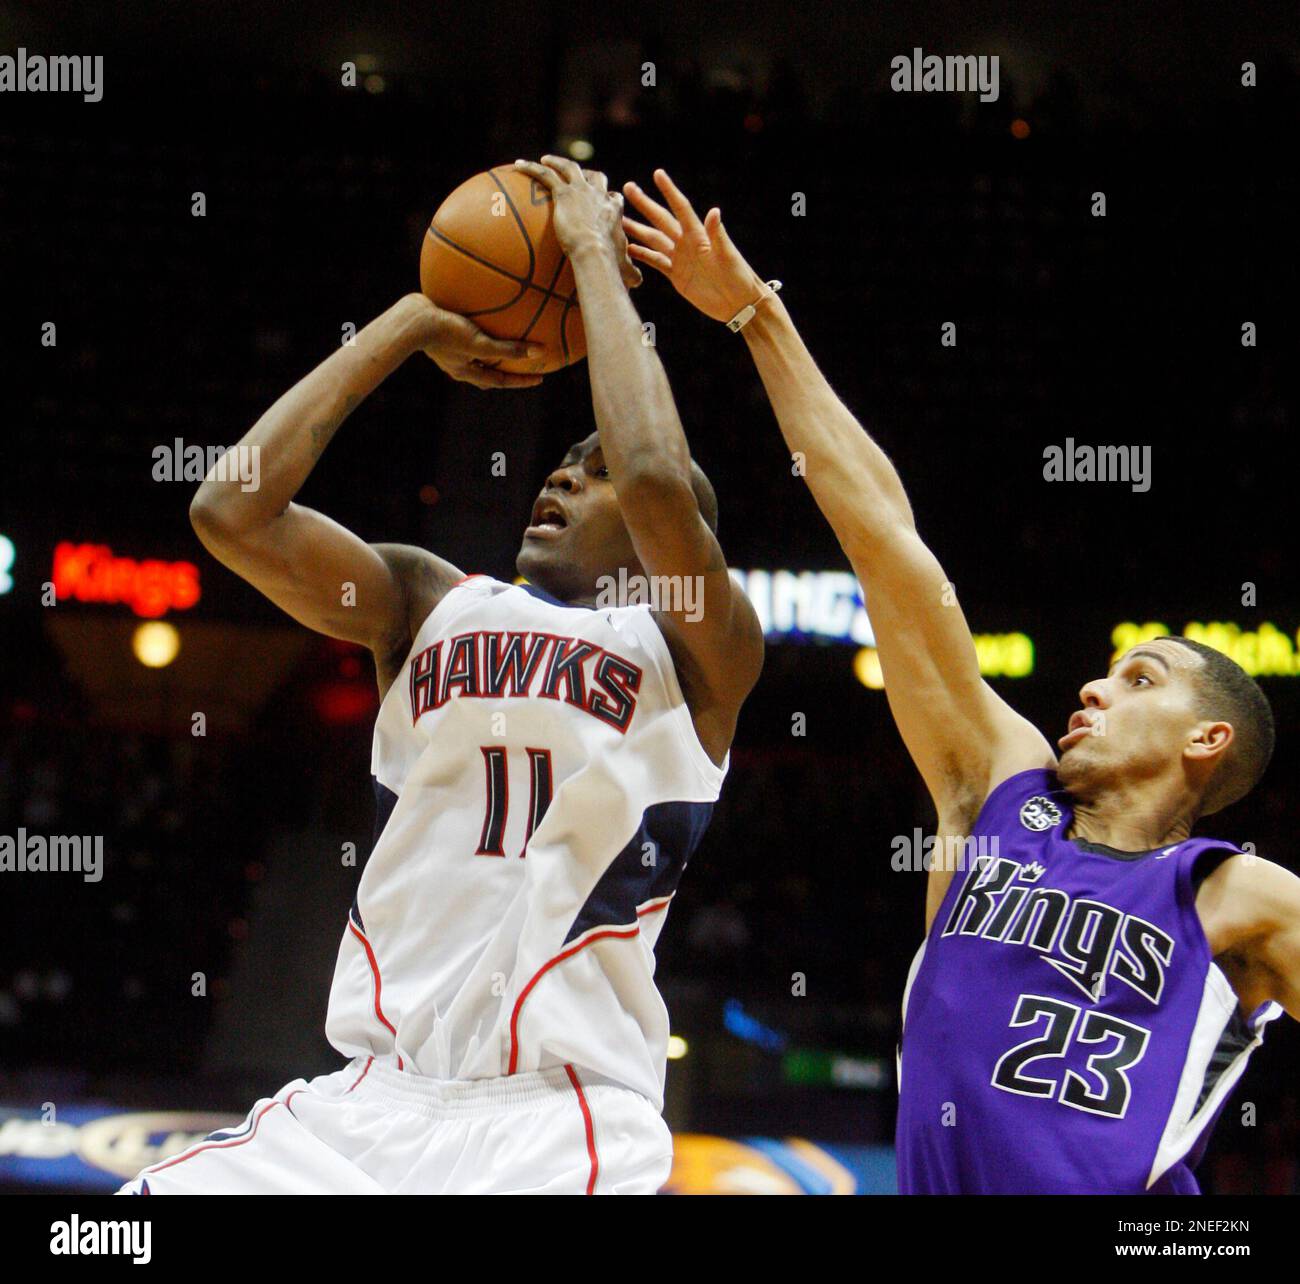 Atlanta Hawks' Jamal Crawford (11) drives to the basket as Miami Heat's  Eddie House, right, defends during an NBA basketball game in Miami,  Tuesday, Jan. 18, 2011. (AP Photo/Lynne Sladky Stock Photo - Alamy